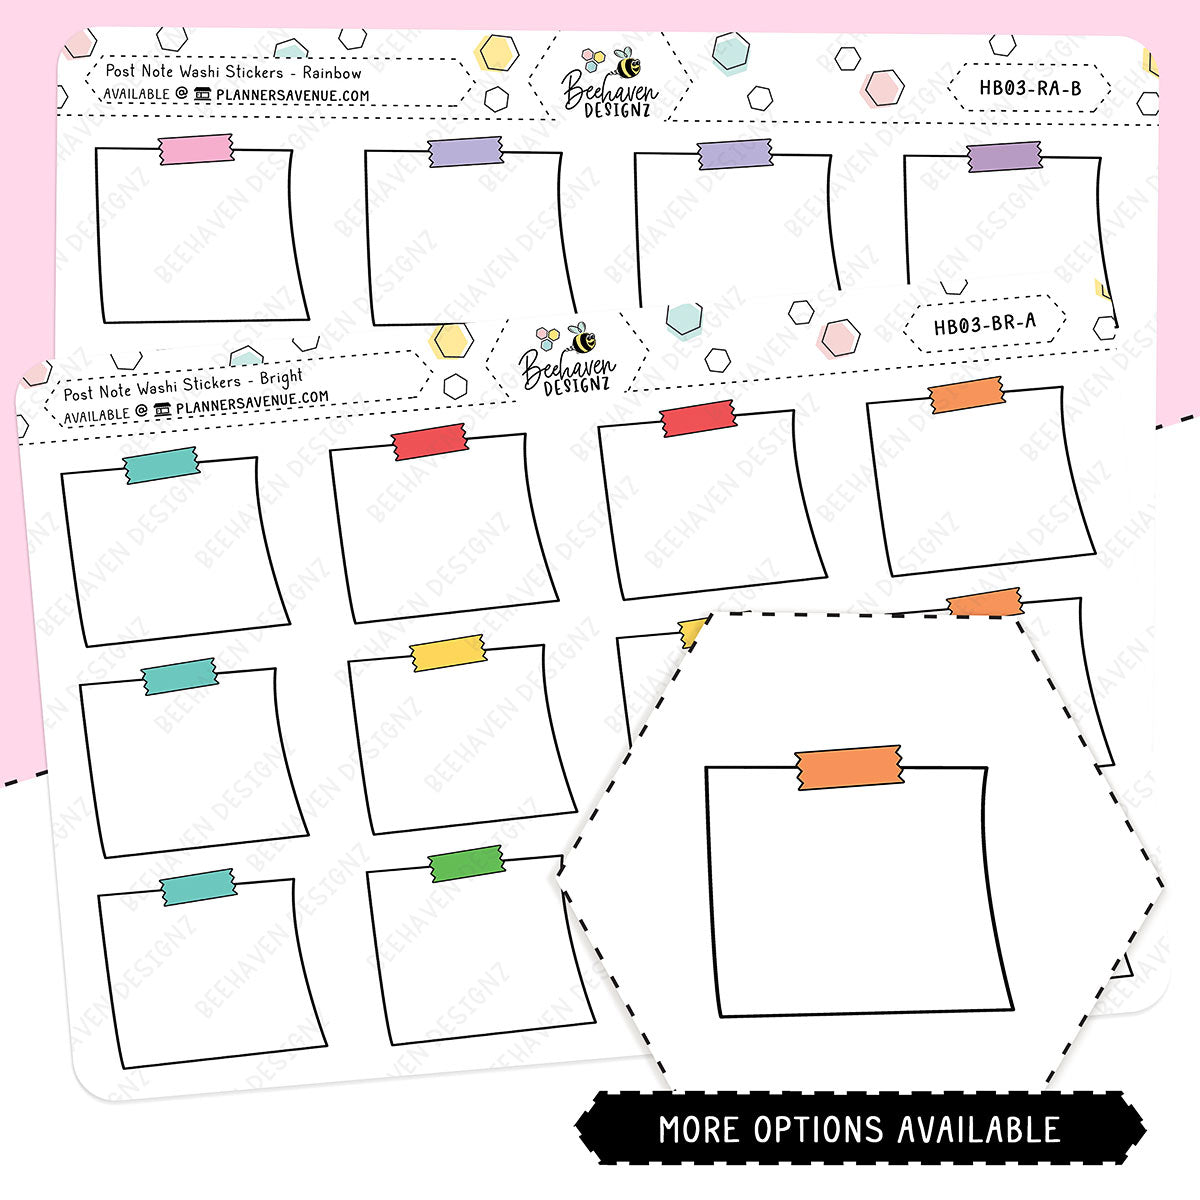 Post Note Washi Planner Stickers